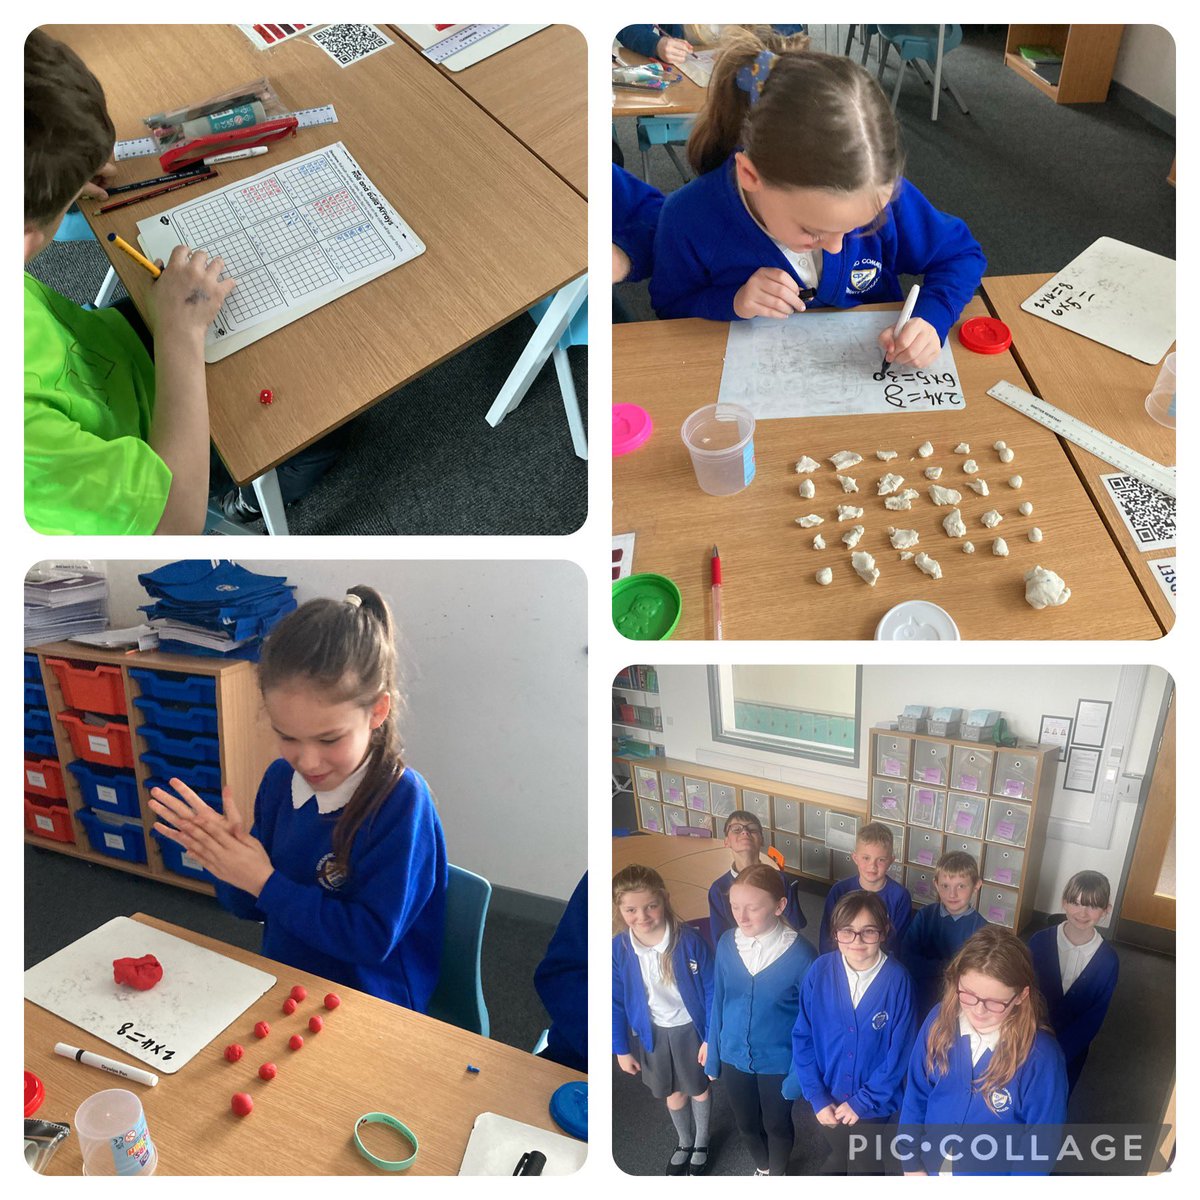 Practical maths today! Mrs Kings maths class have been solving multiplication sums using their knowledge of arrays to help. They even put themselves into arrays to solve questions! #ambitiouscapablelearners
 #mathsisfun #practicallearning 
@WG_Education